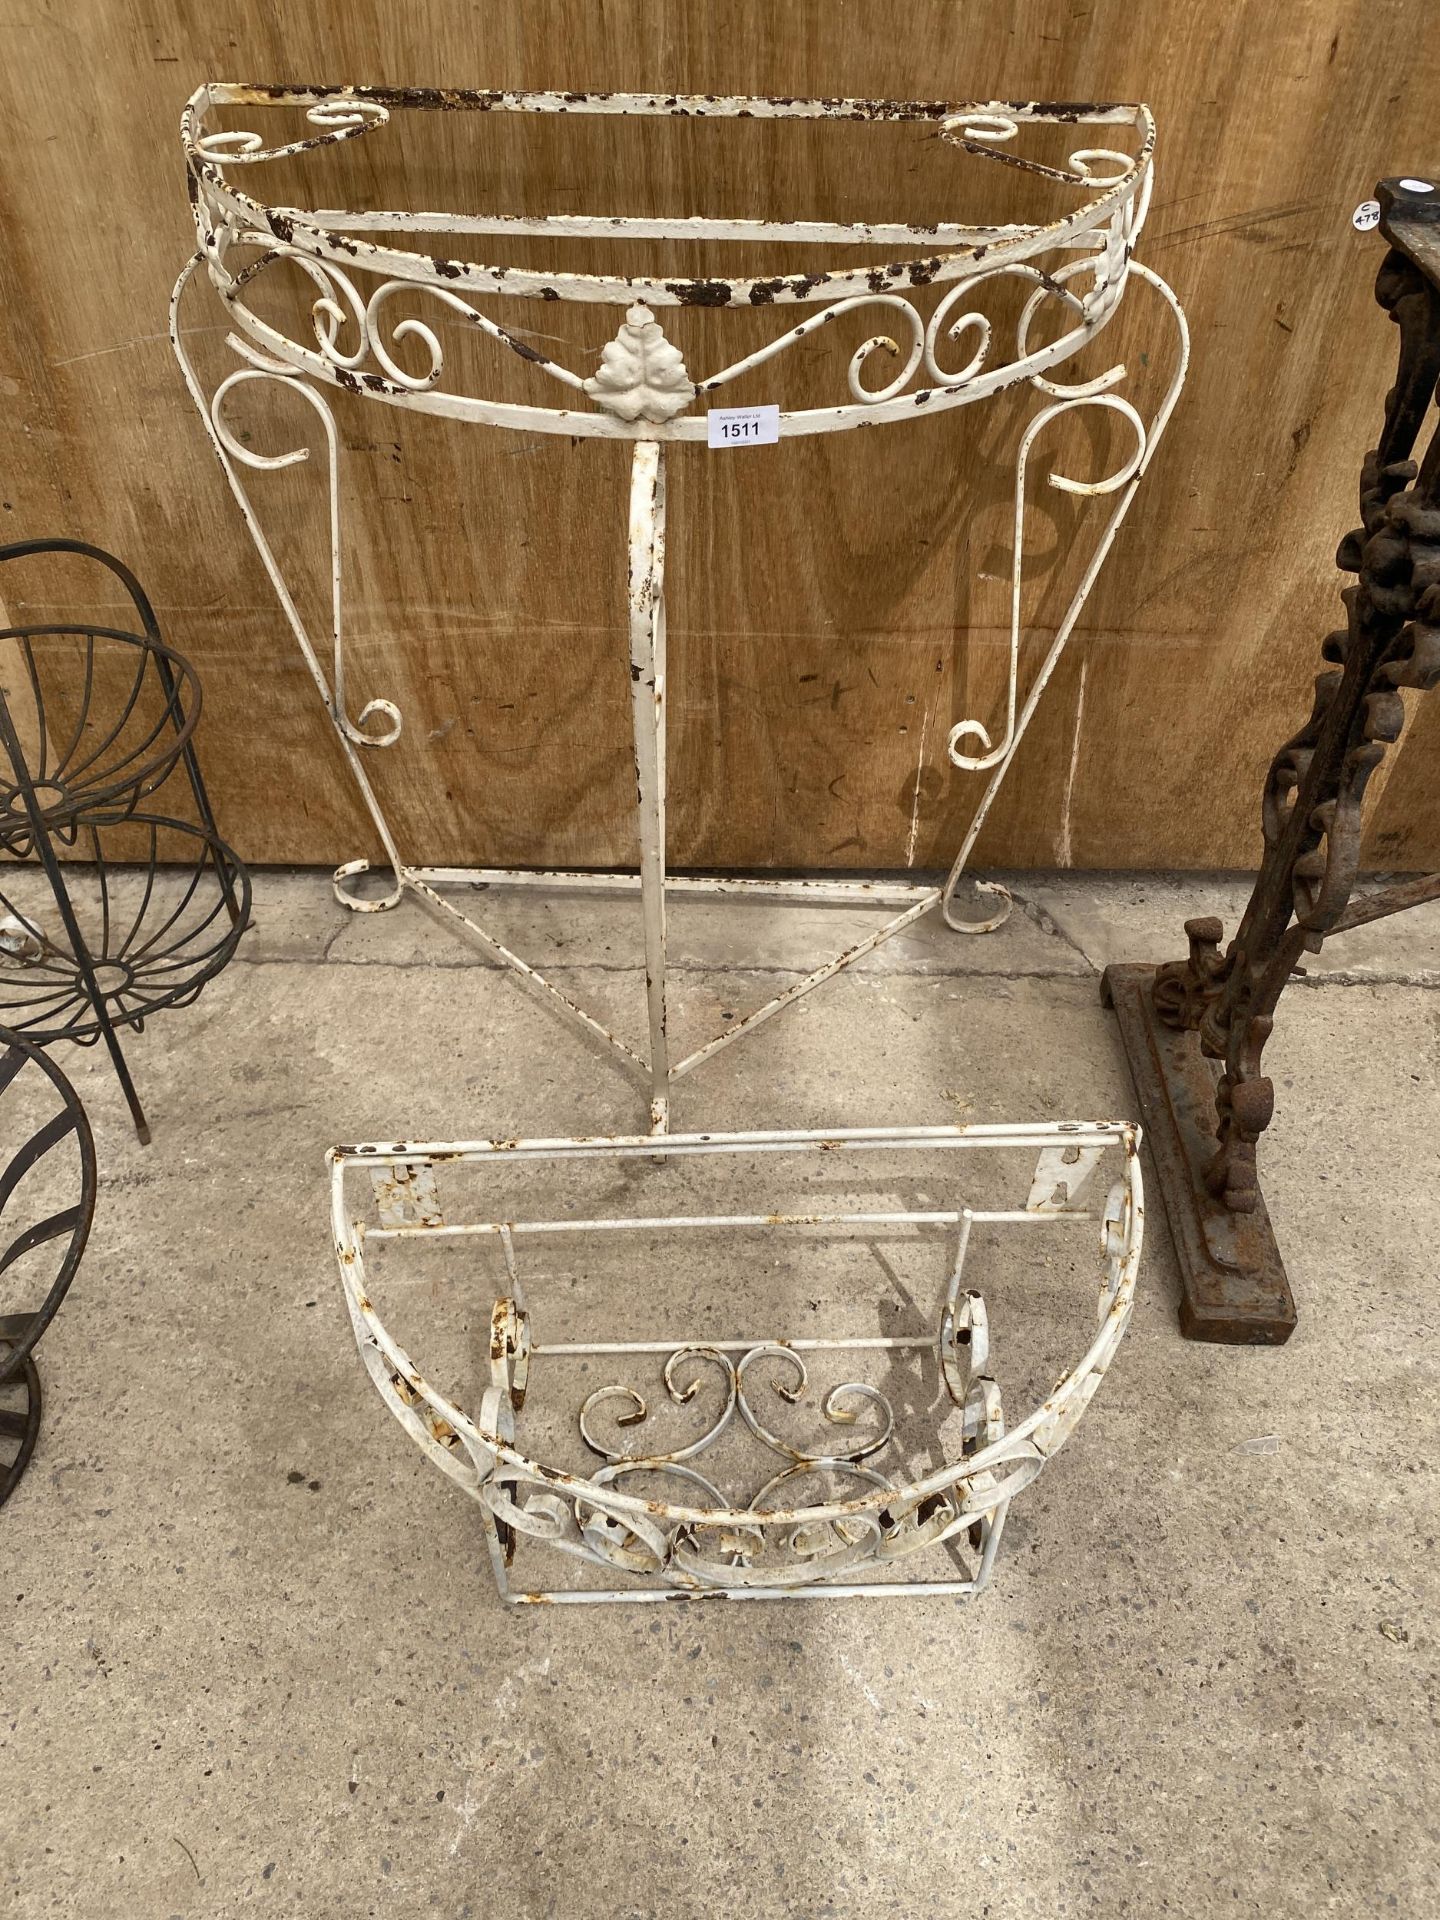 A WROUGHT IRON HALF MOON TABLE BASE AND A WINDOW BOX PLANT HOLDER